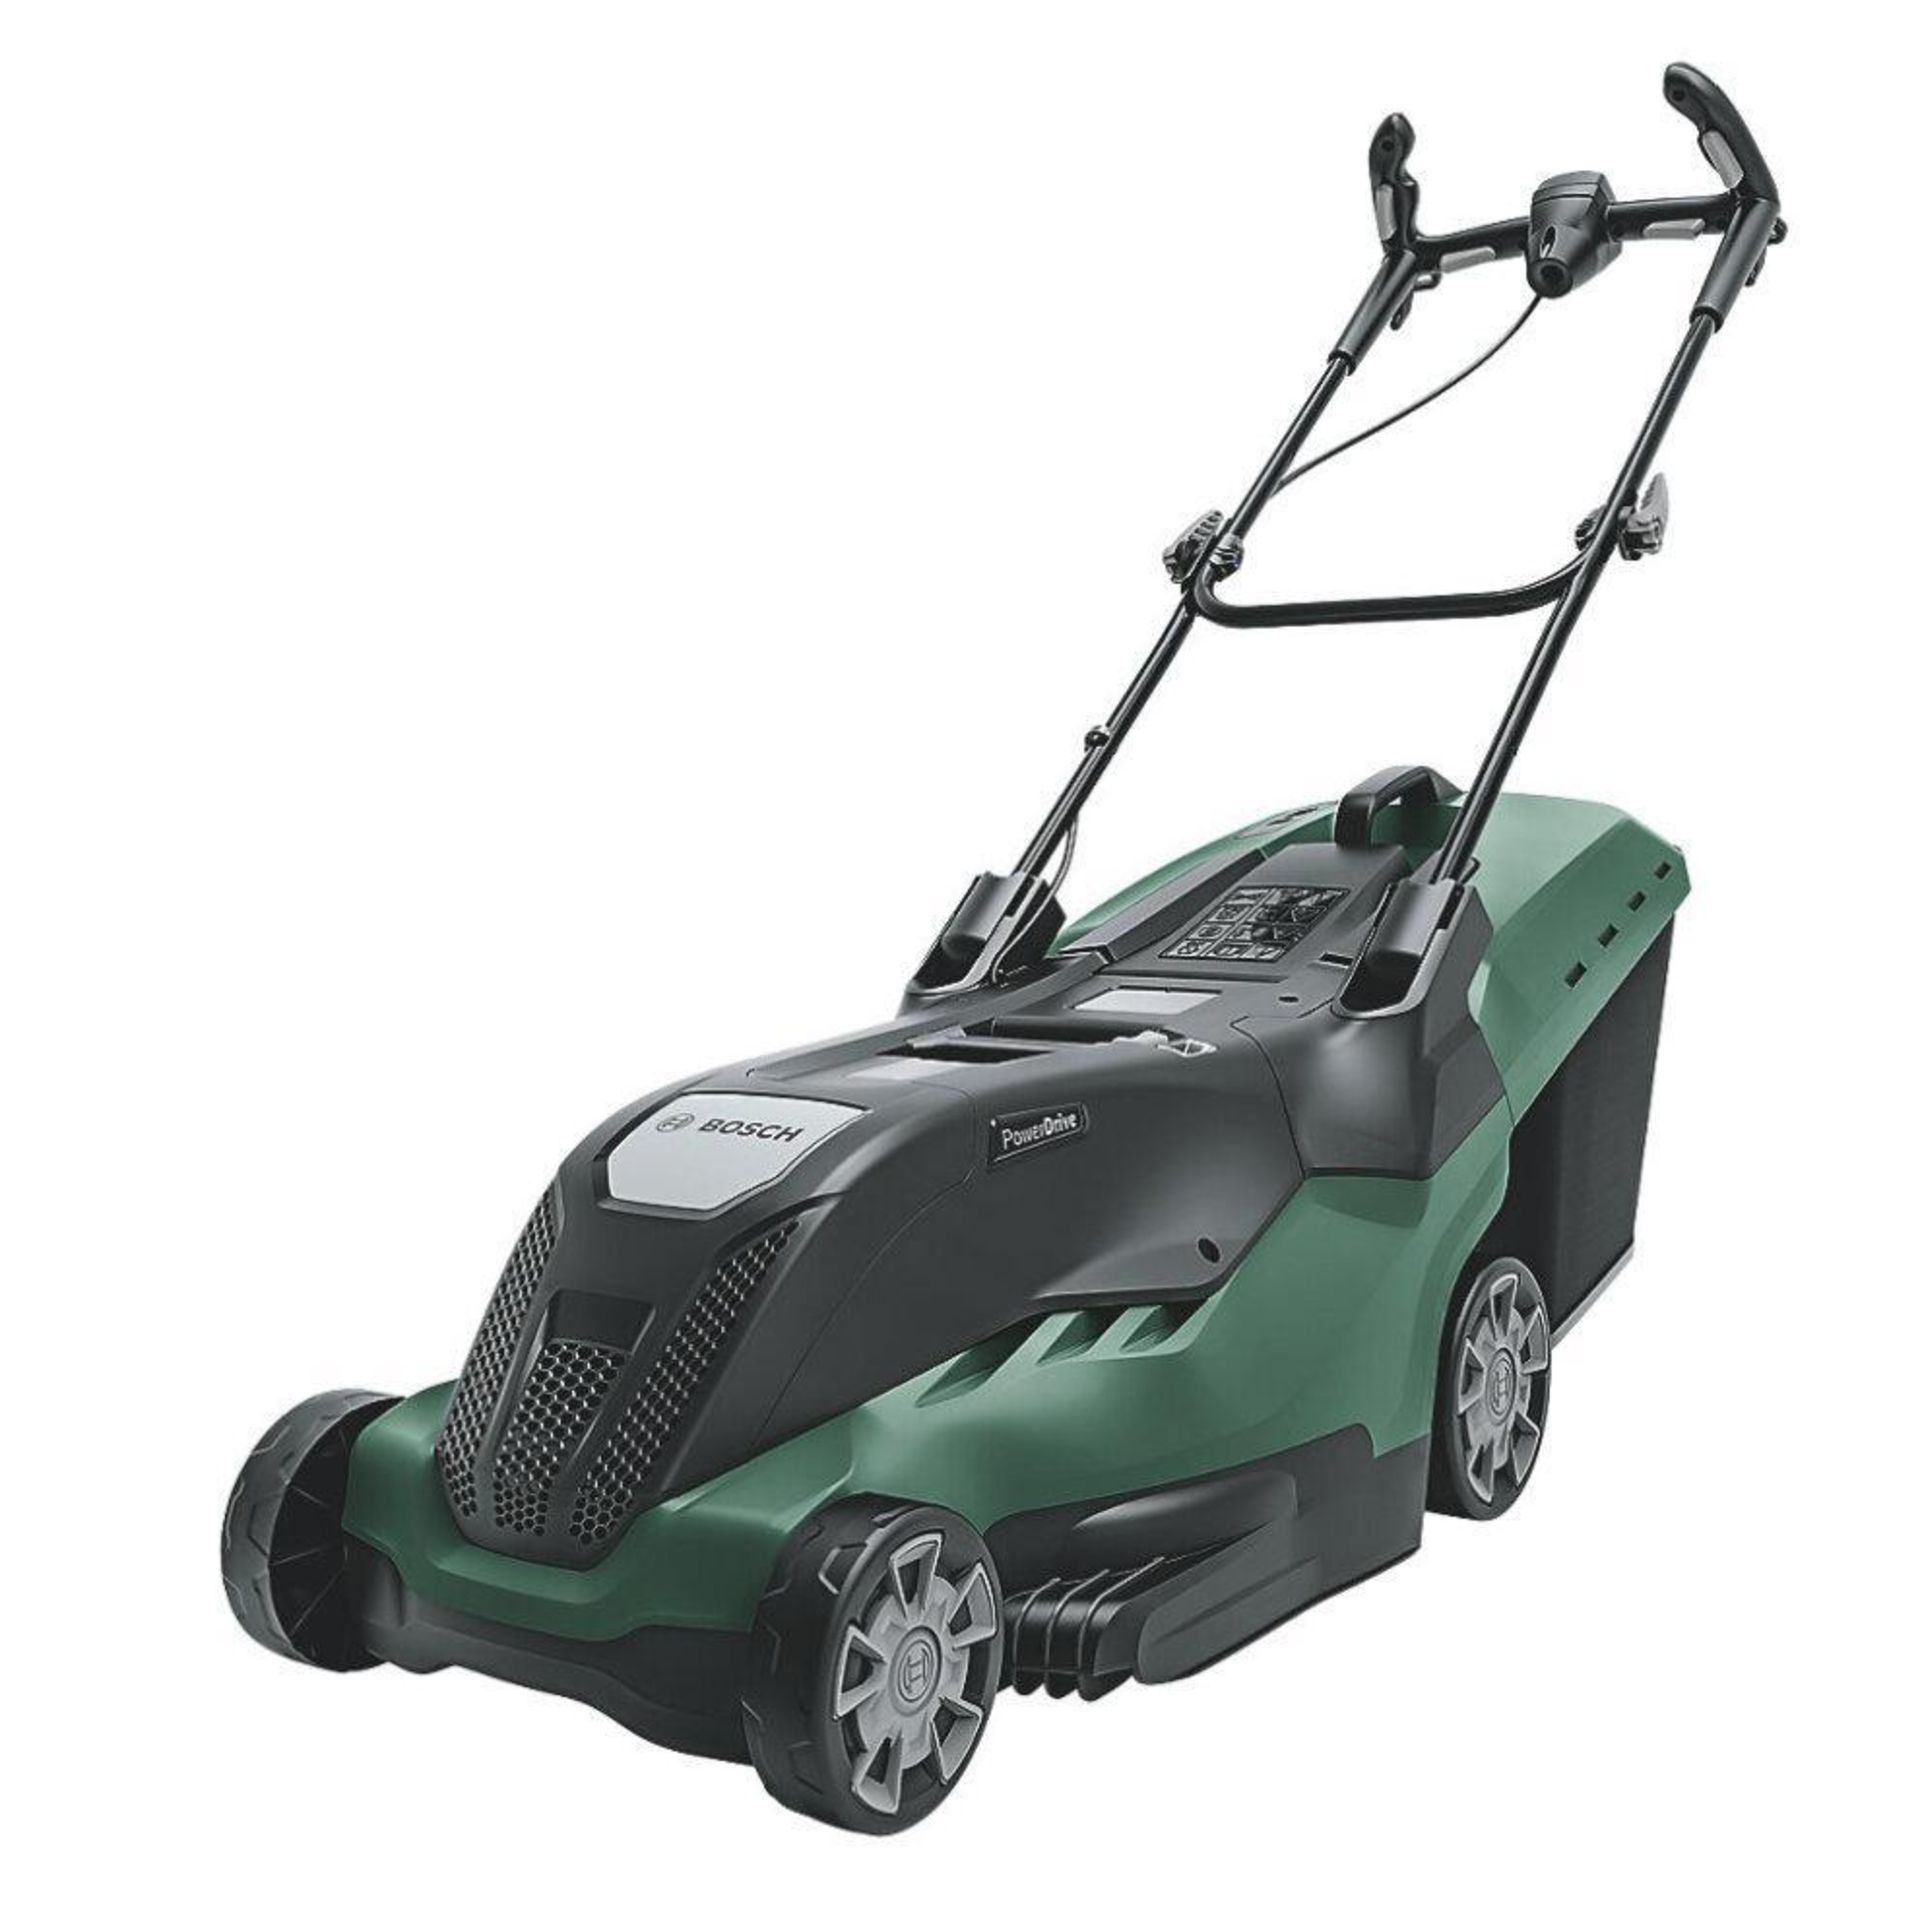 Bosch Rotak Universal 650 Corded Rotary Lawnmower - SR4R. With cutting and collection in one - Image 2 of 2